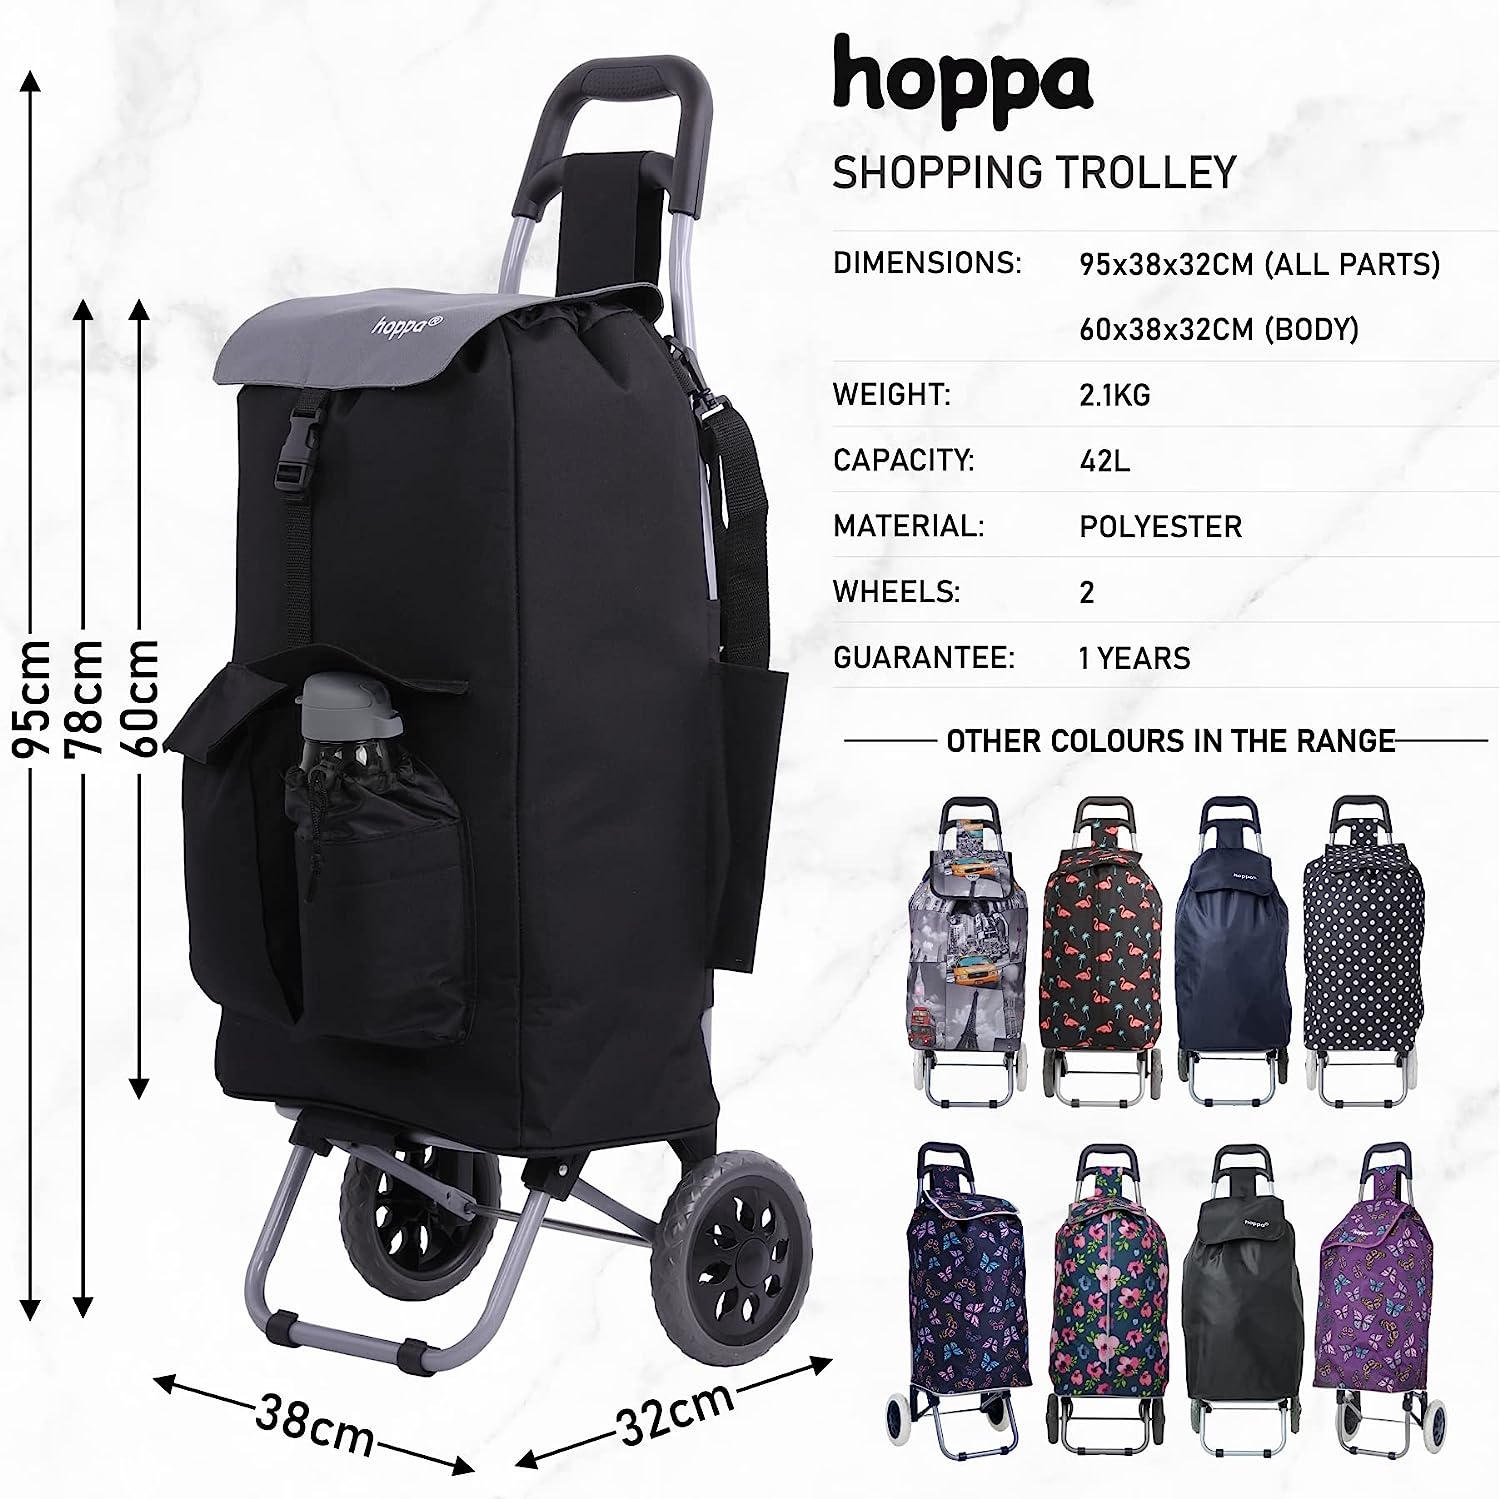 Carry-On Cabin Approved Hand Luggage, Suitcase Travel Trolley Case Bag. |  Size 54 cm X 33 cm X 20 cm | Capacity 37 Liters | 2 Carrying Handles .  Model HM299 (Black) : Amazon.co.uk: Fashion